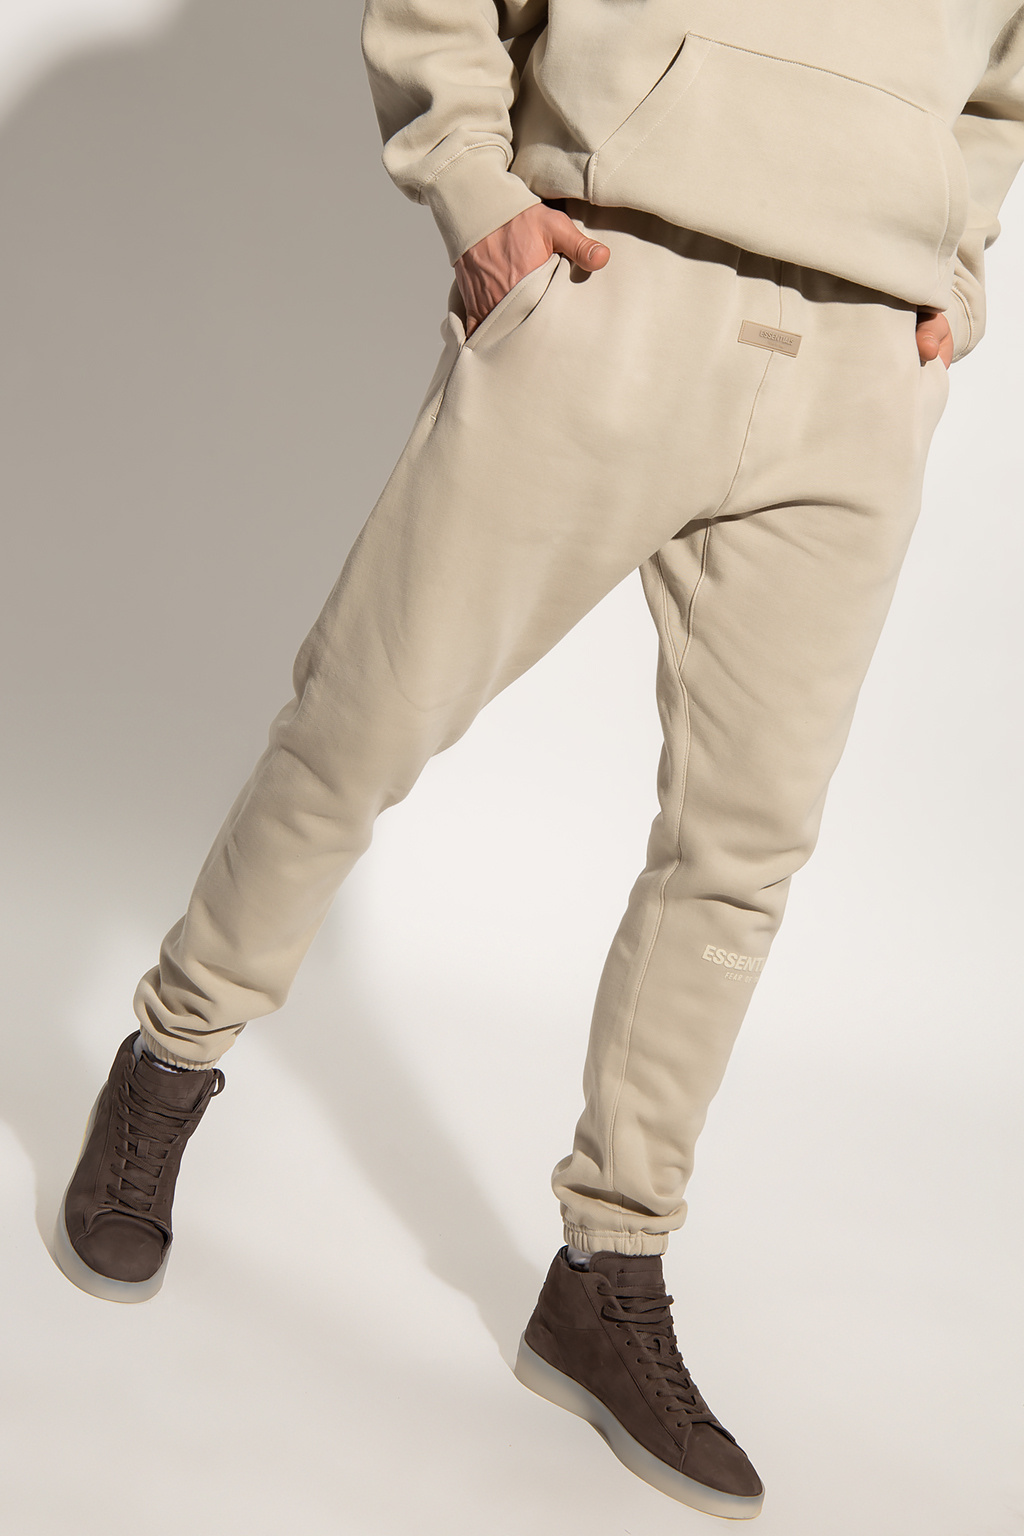 DKNY PANT - Cargo trousers - wheat/beige 